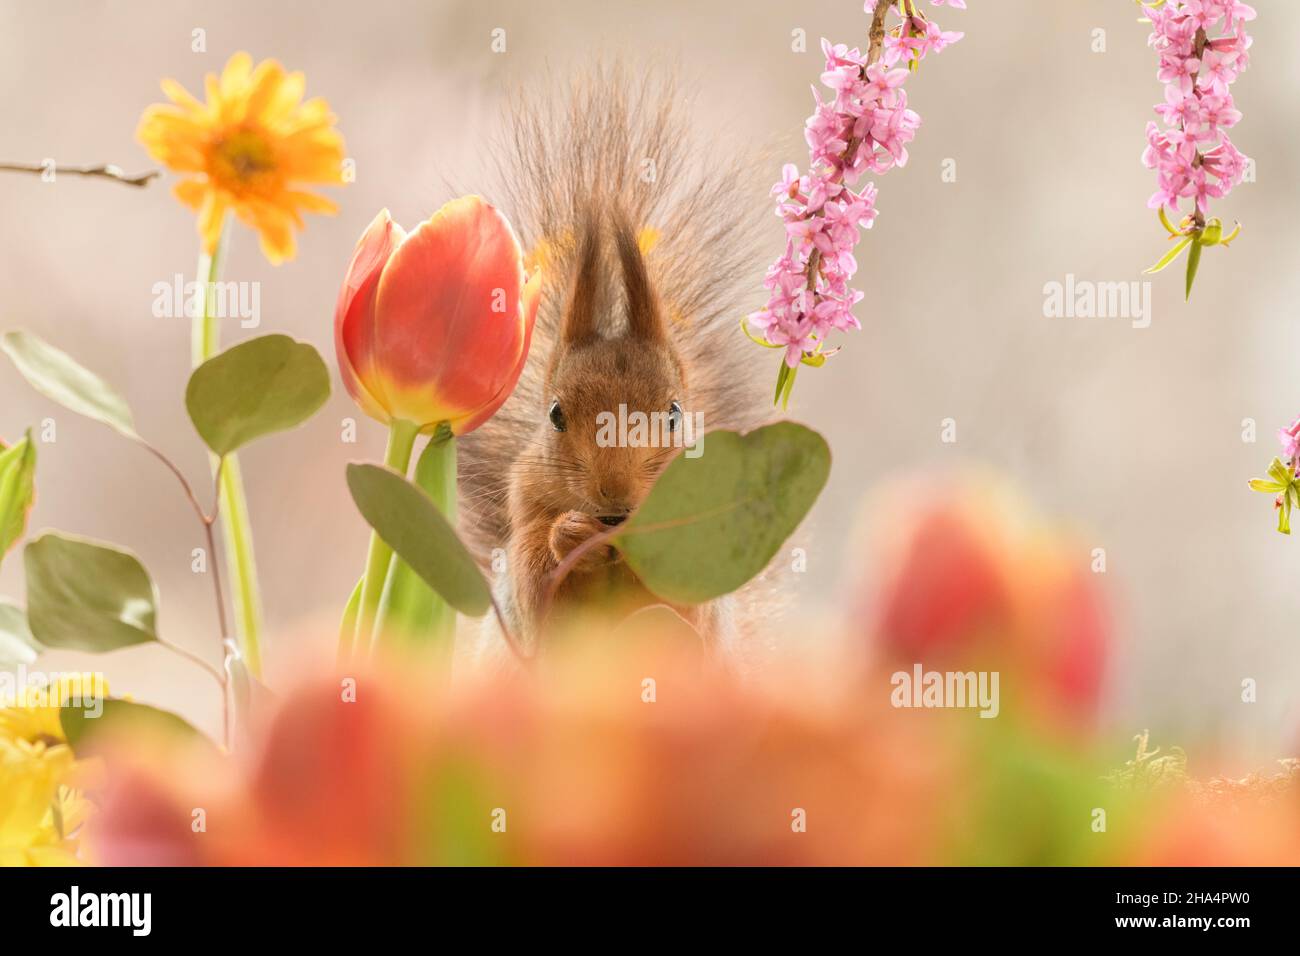 red squirrel is standing between daphne,tulip and leaves looking at viewer Stock Photo